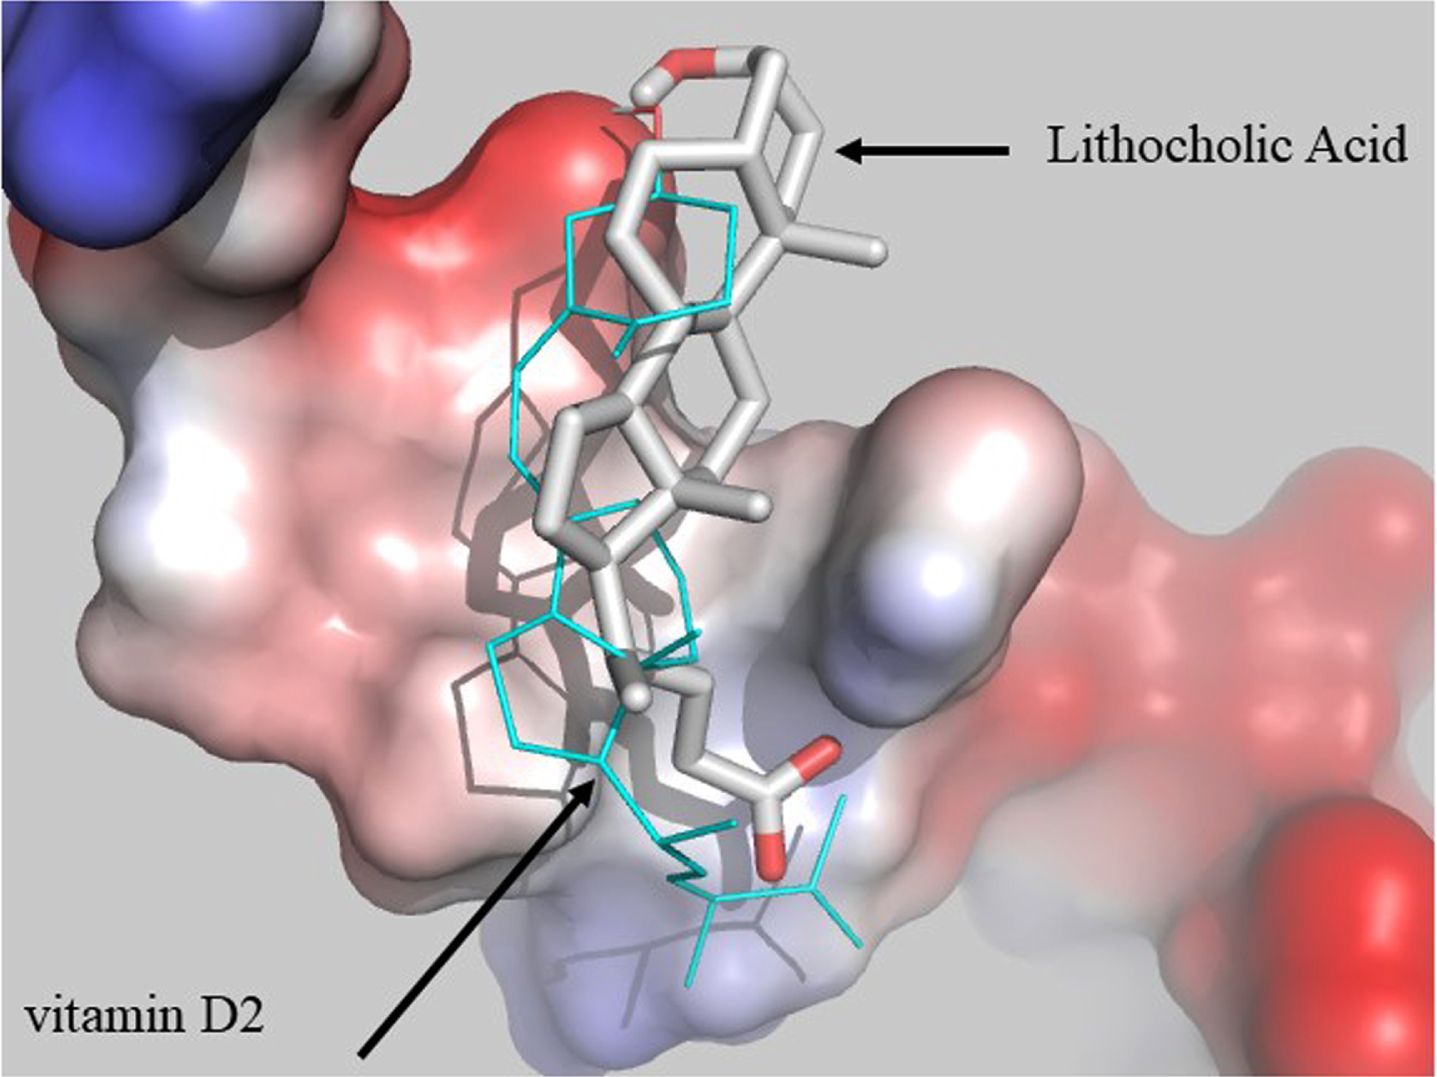 Molecular modelling simulation of docking between LCA (grey sticks), vitamin D2 (cyan lines) and Aβ1 - 40, demonstrating possible promotion of Aβ plaque formation by LCA.